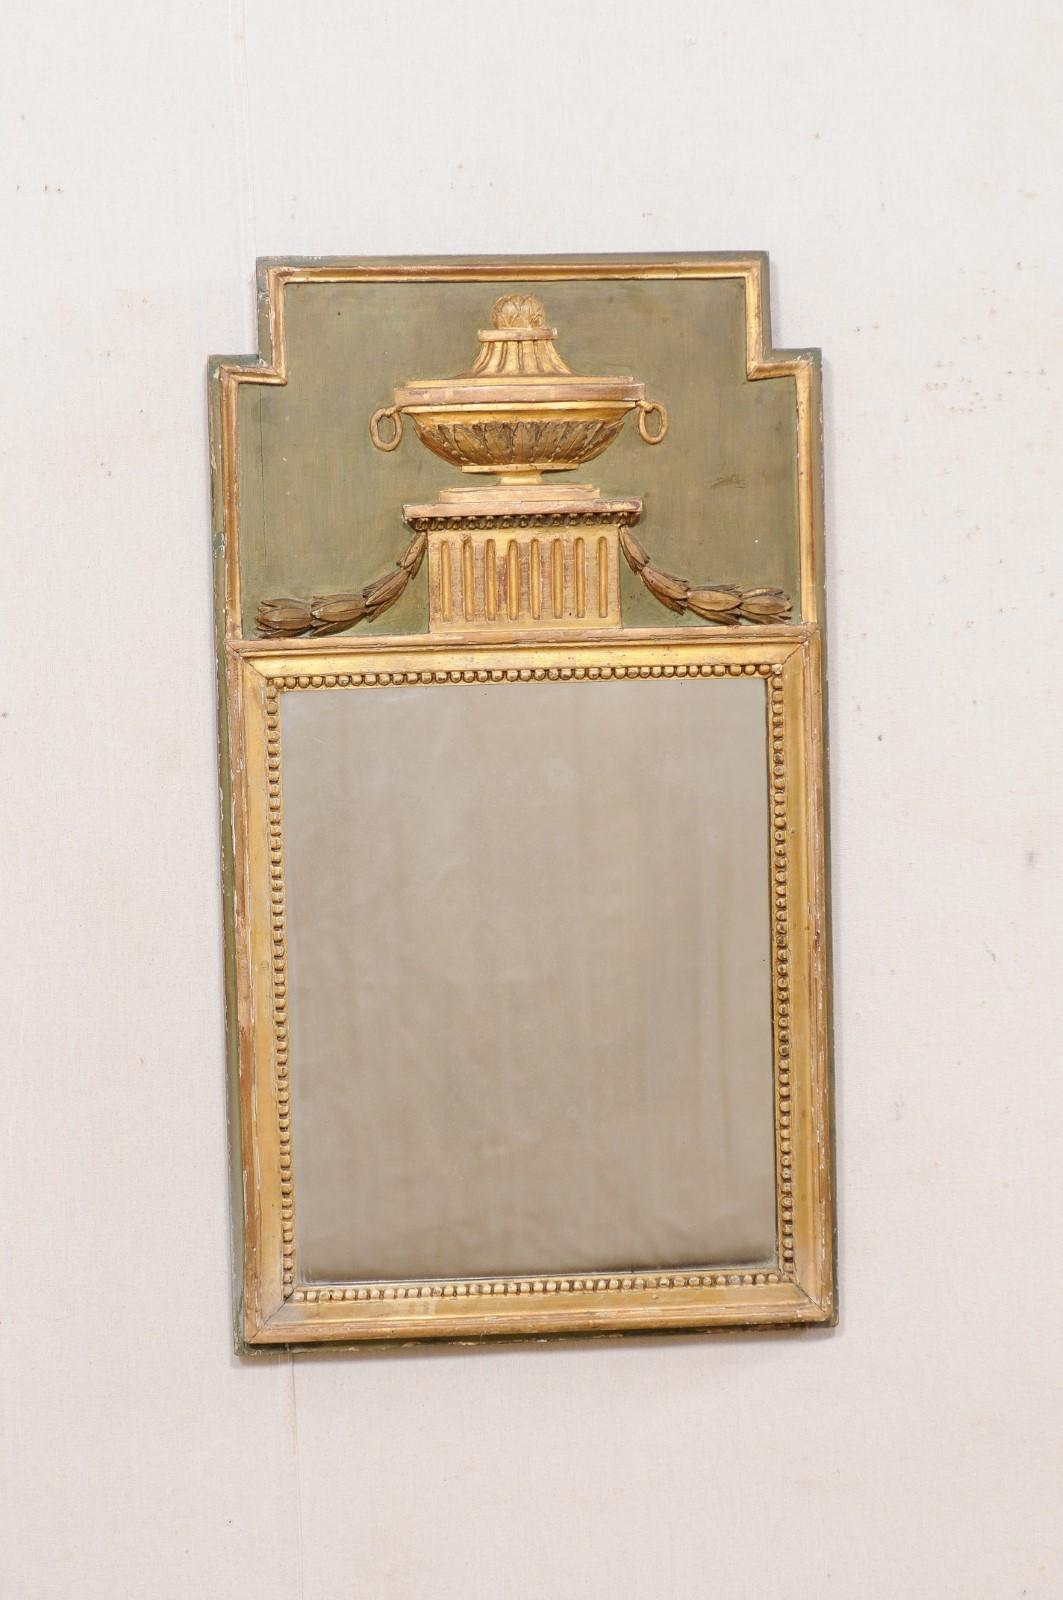 A French neoclassical mirror, with its original finish, from the early 19th century. This antique mirror from France has a mostly rectangular-shape, with step up style top crest. The carved-wood plaque top, reminiscent of trumeau design, is carved